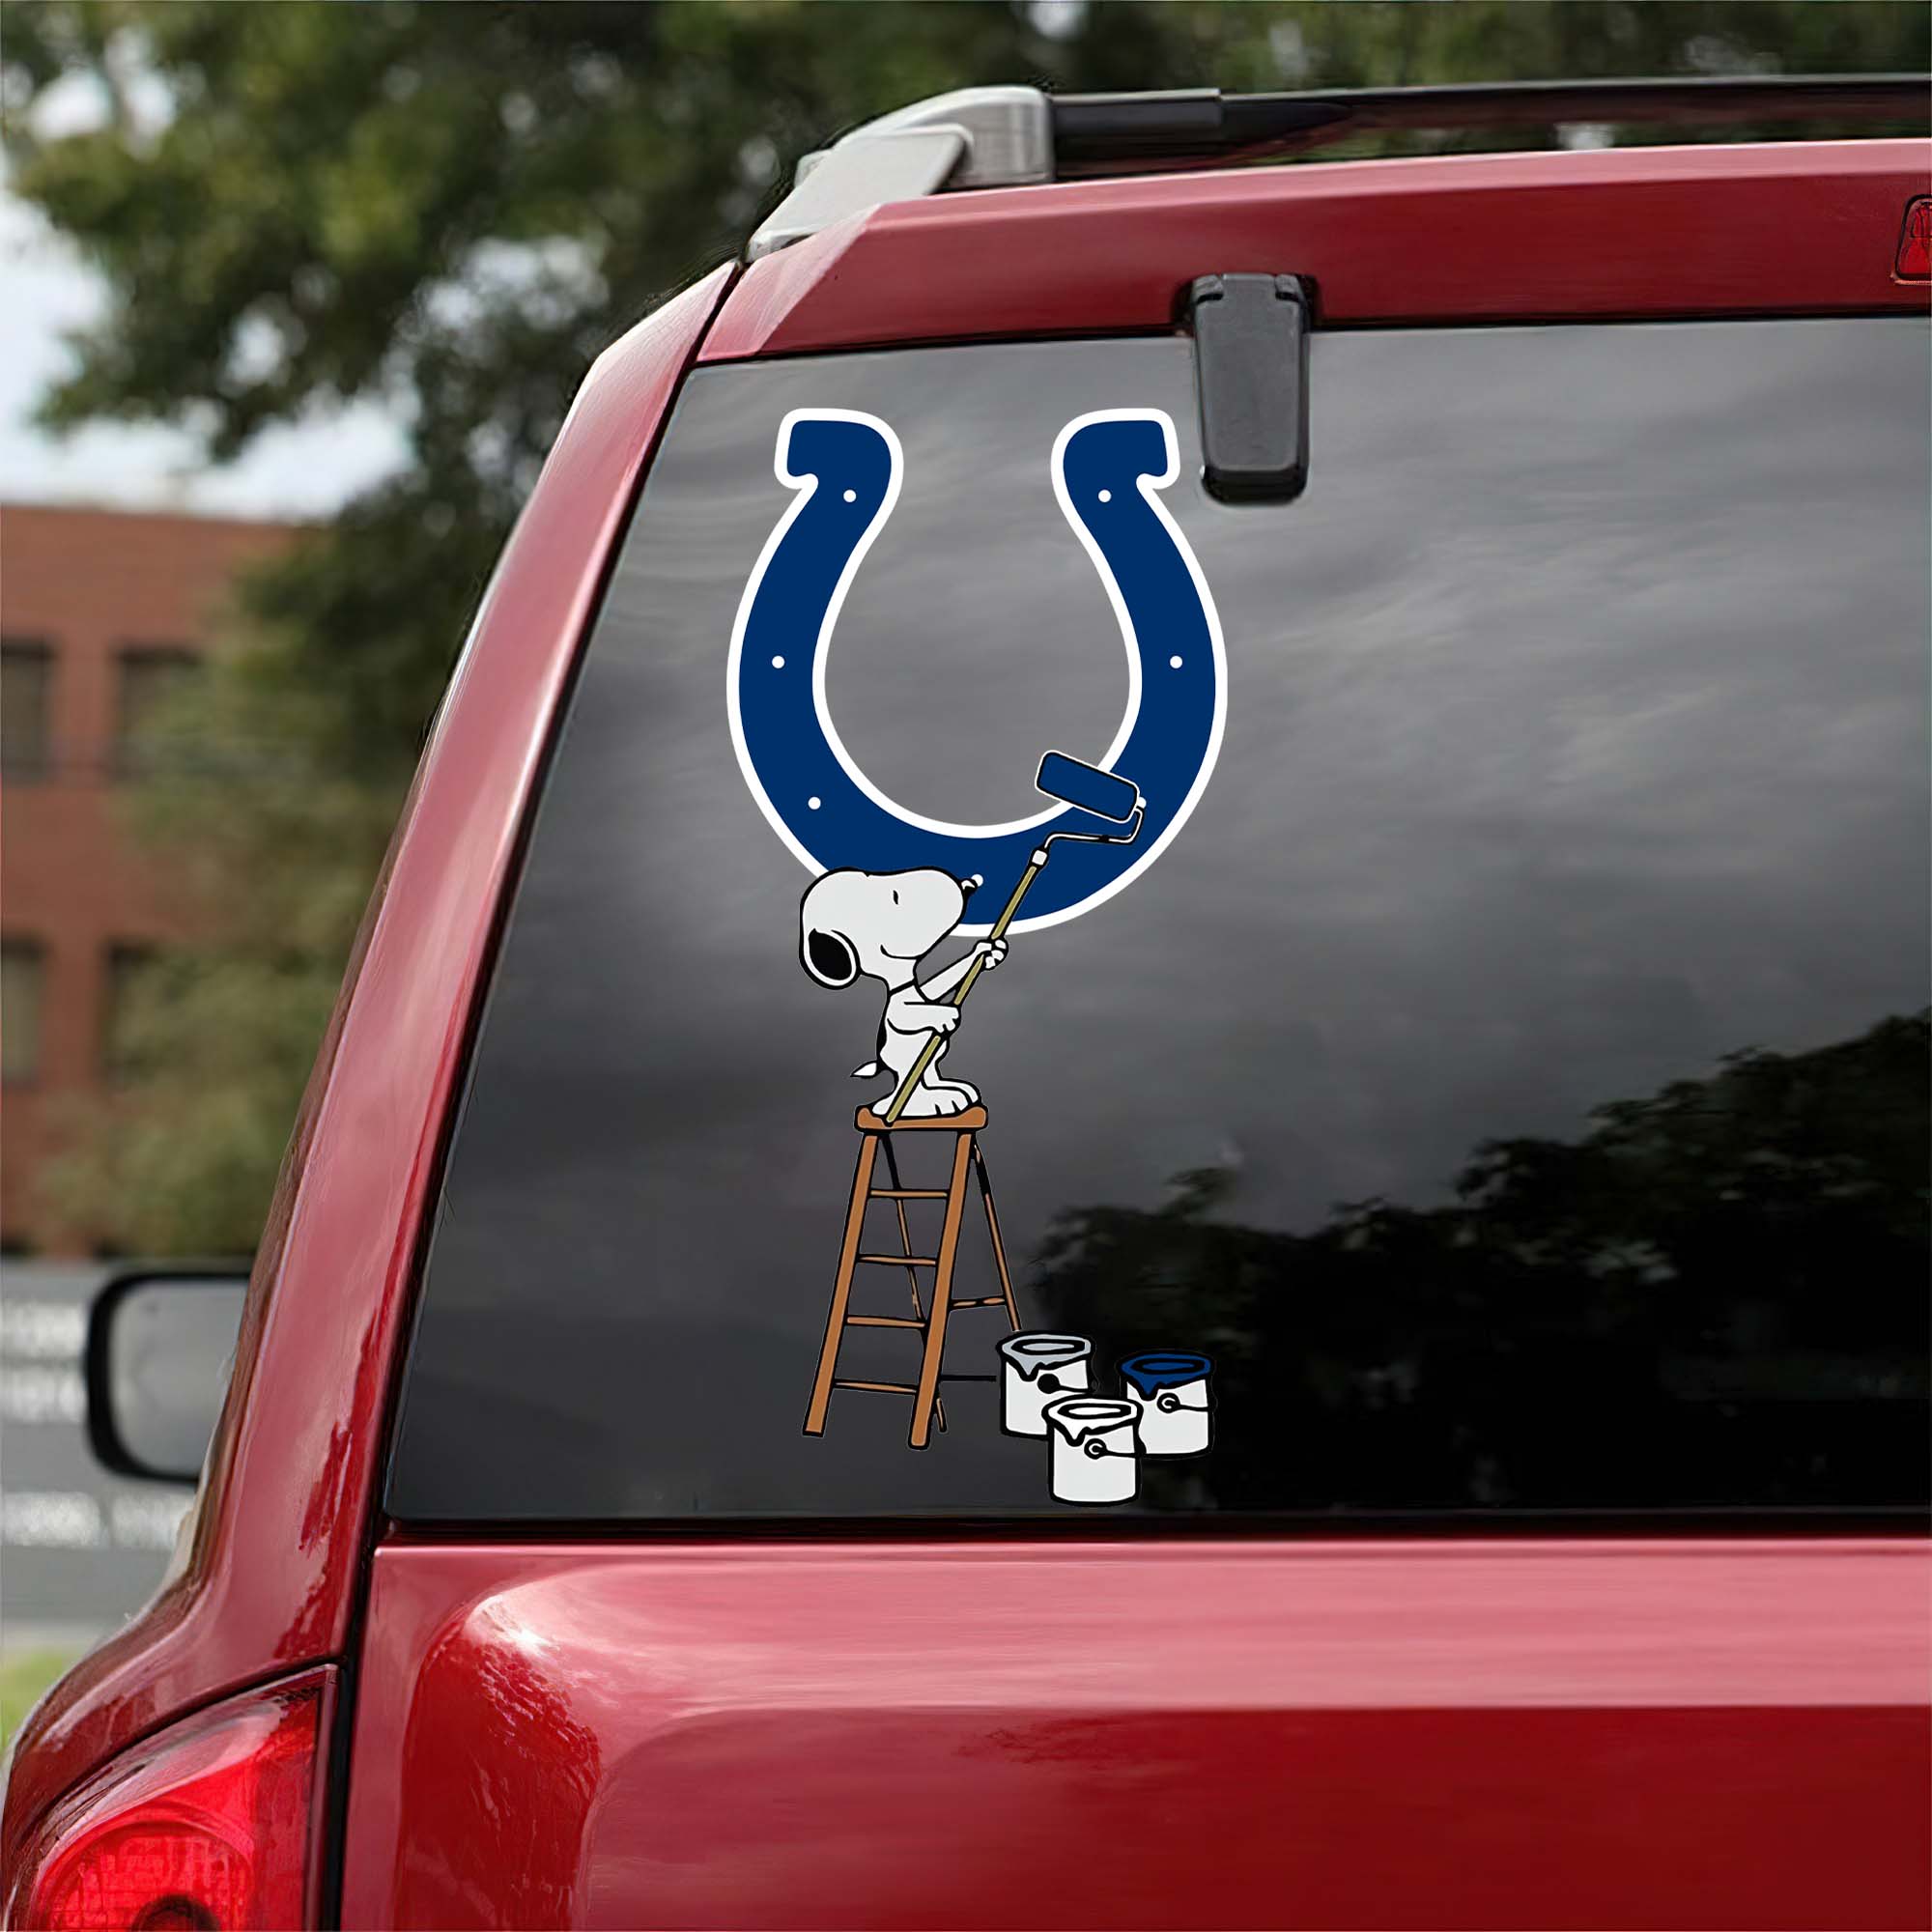 Indianapolis Colts Mix Snoopy Car Decal Art PT54723